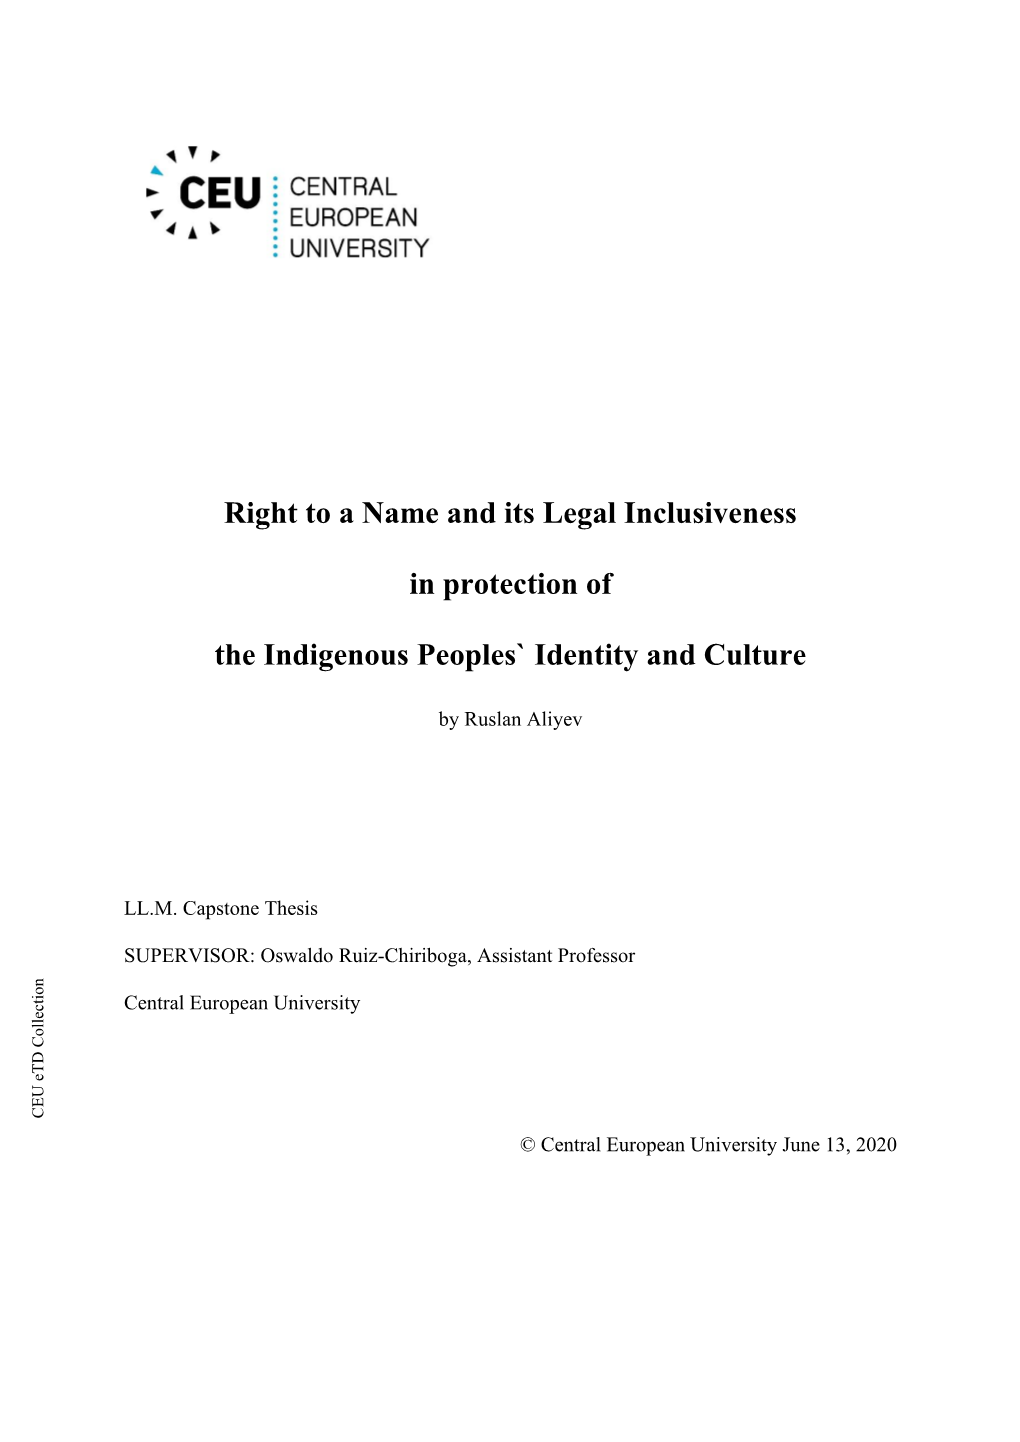 Right to a Name and Its Legal Inclusiveness in Protection of The